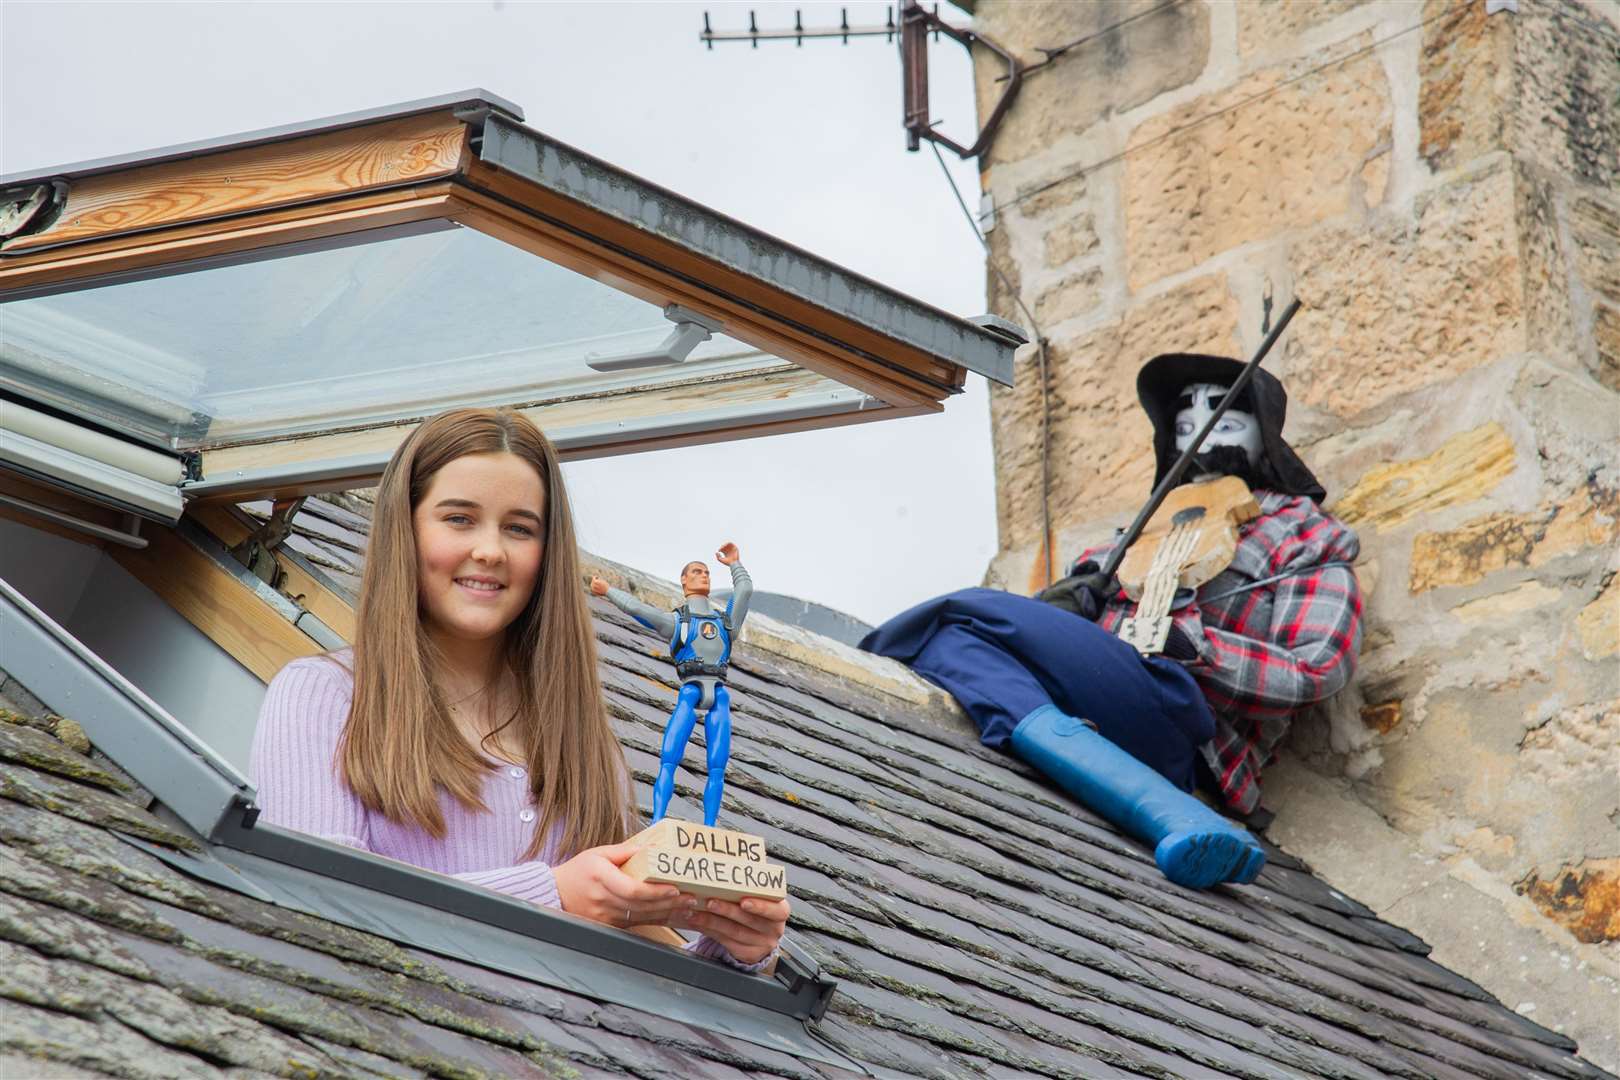 Kayla McCallum shows off her family's winning trophy and entry - the Fiddler on the roof. ..2020 Dallas Scarecrow Competition...Picture: Daniel Forsyth..